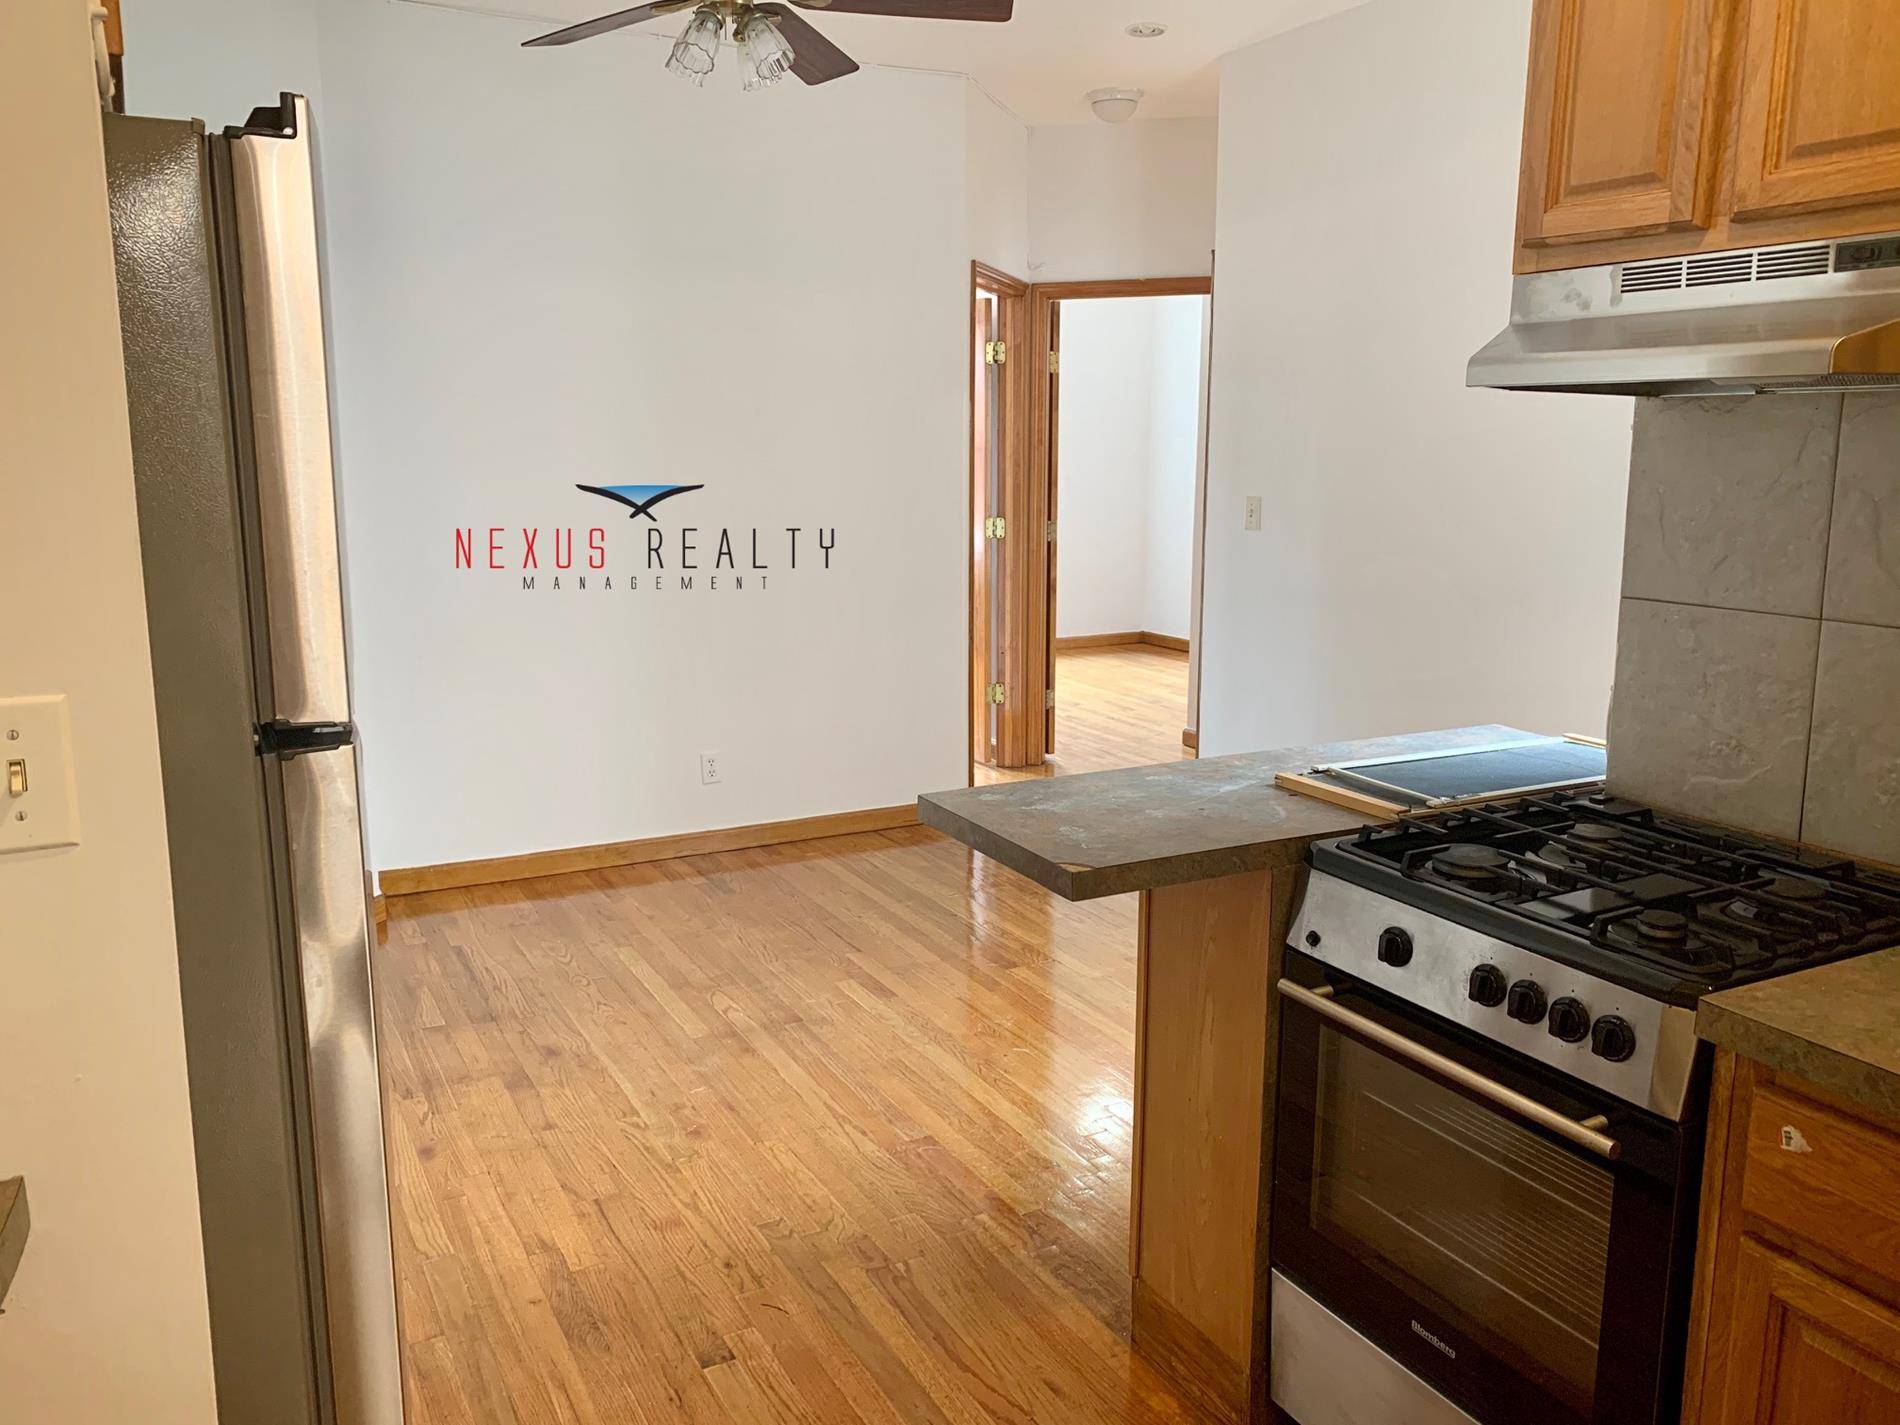 3 Bedroom apartment next to Astoria Park ONLY 2, 250 NO BROKERS FEEBright 3 bedroom apartment on the third floor of a beautiful building, right next to Astoria park.